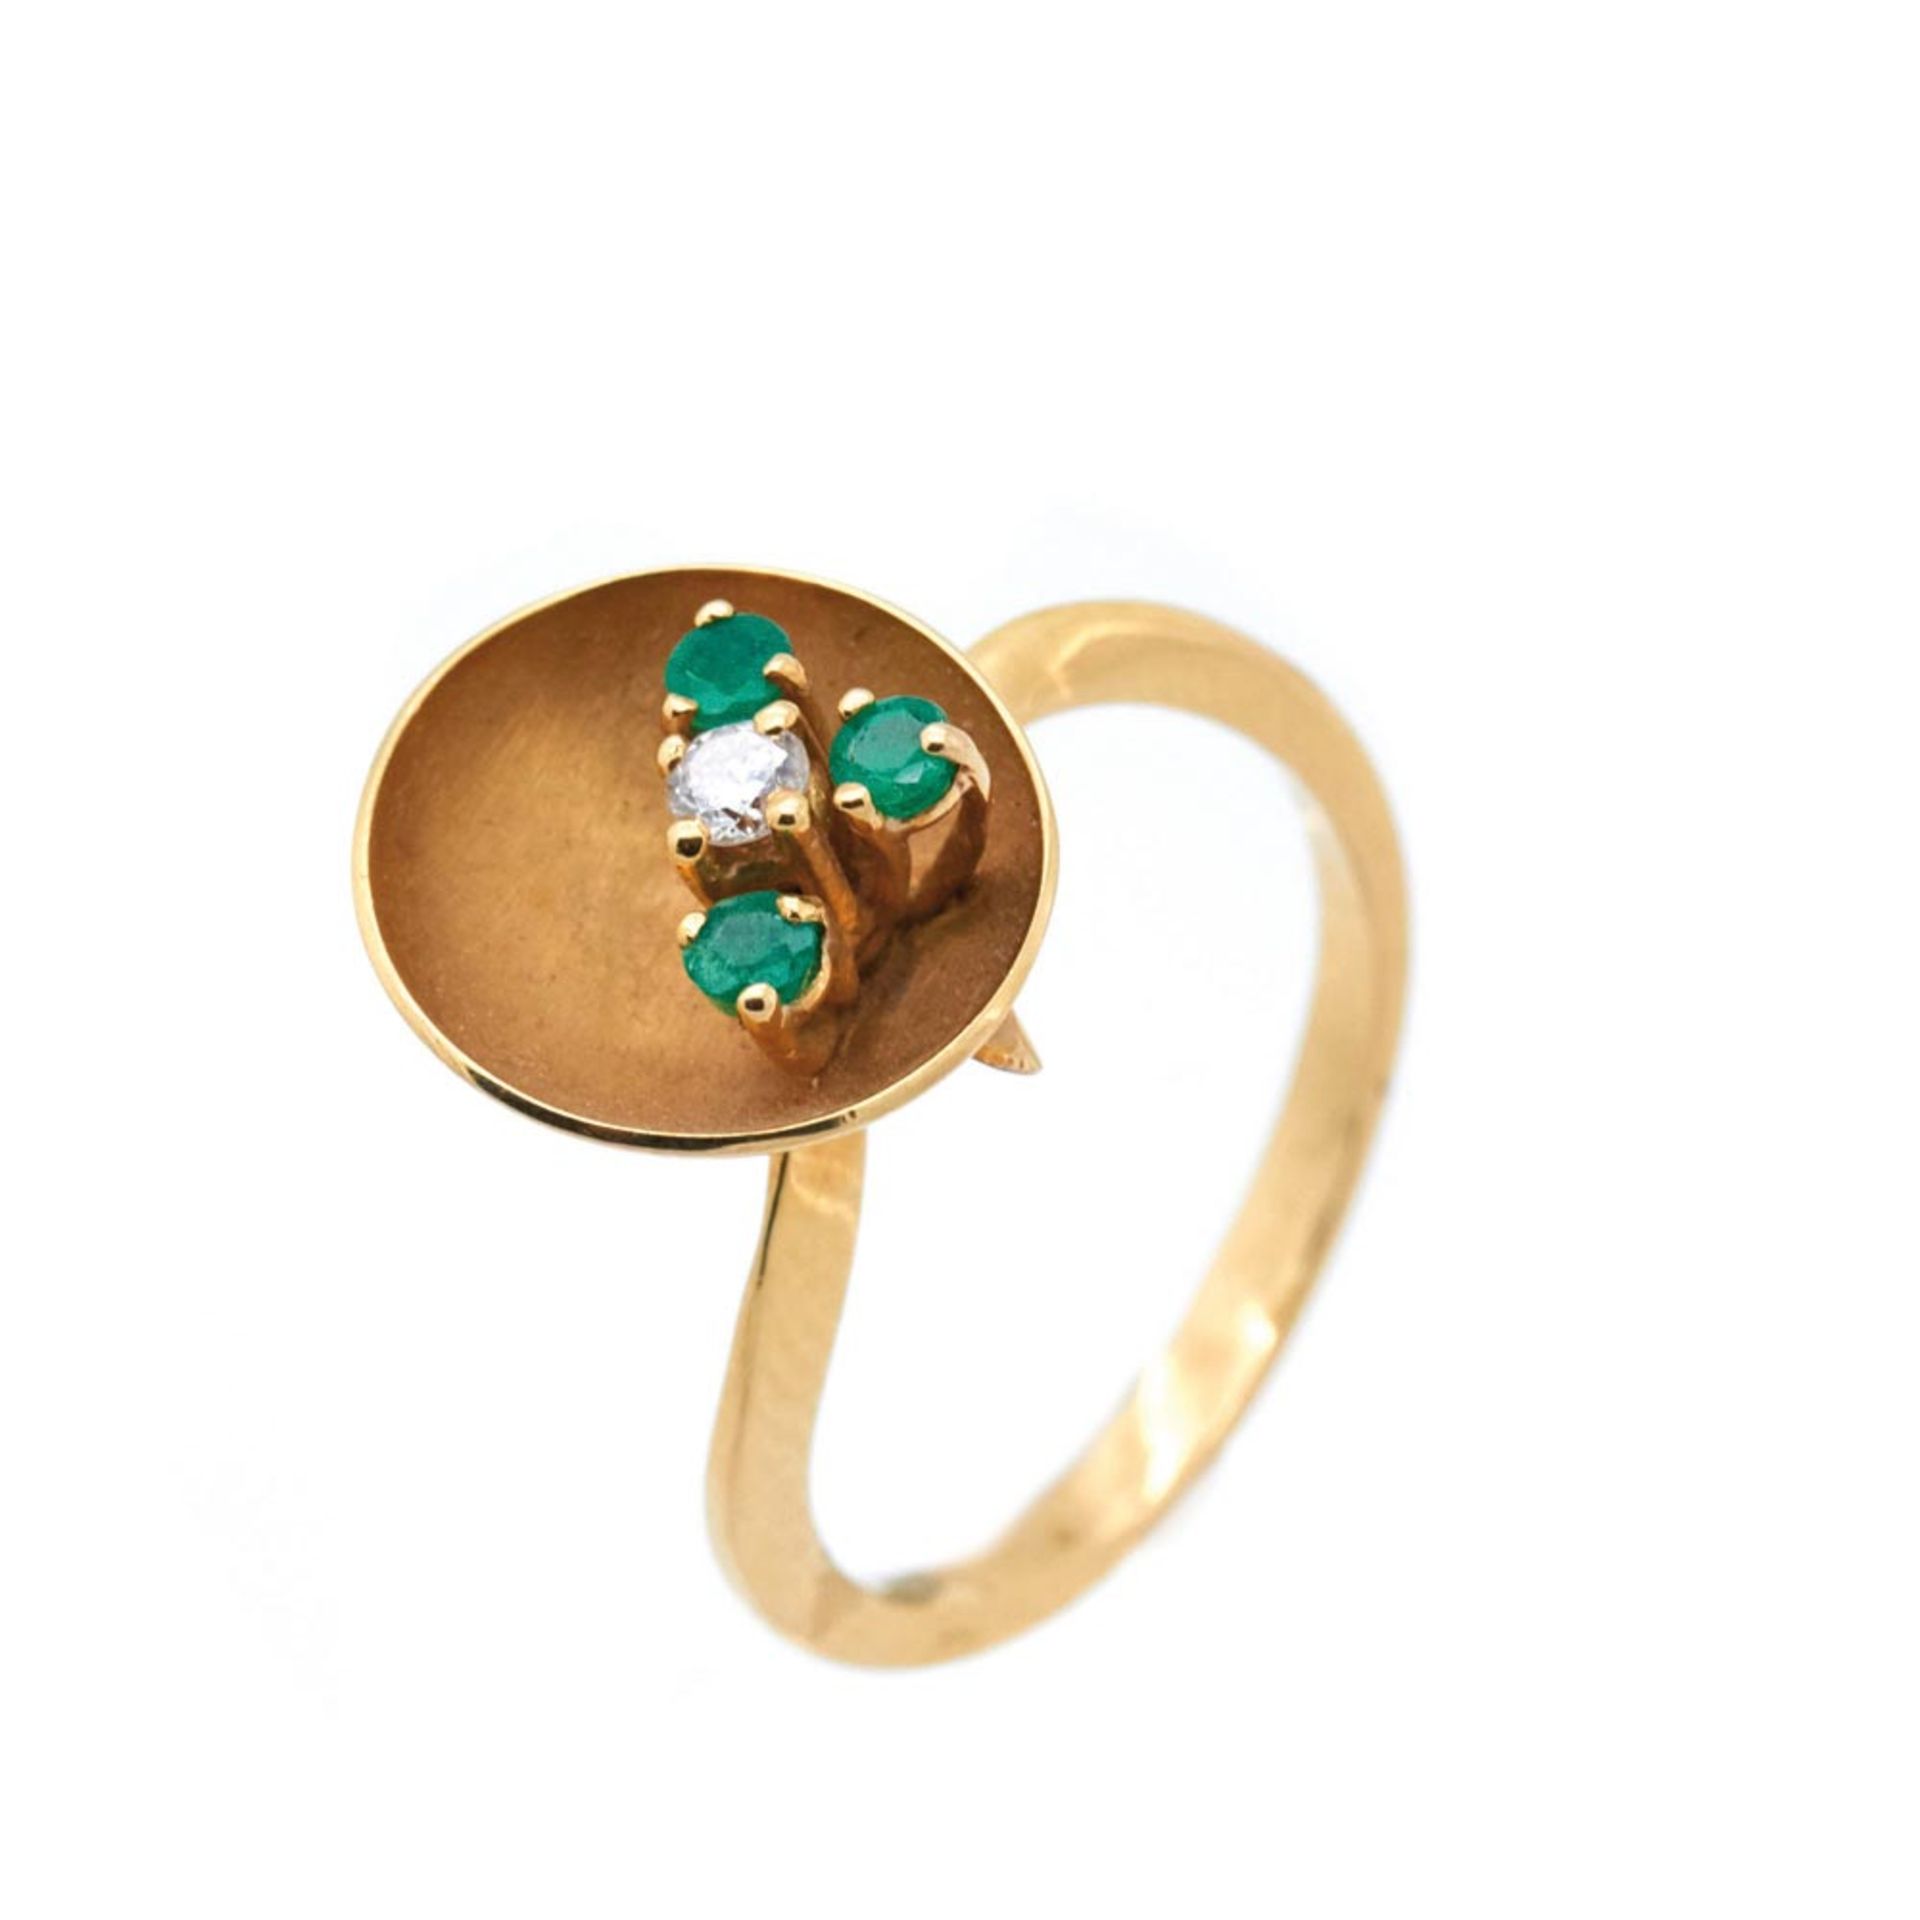 Gold, emerald and diamond ring